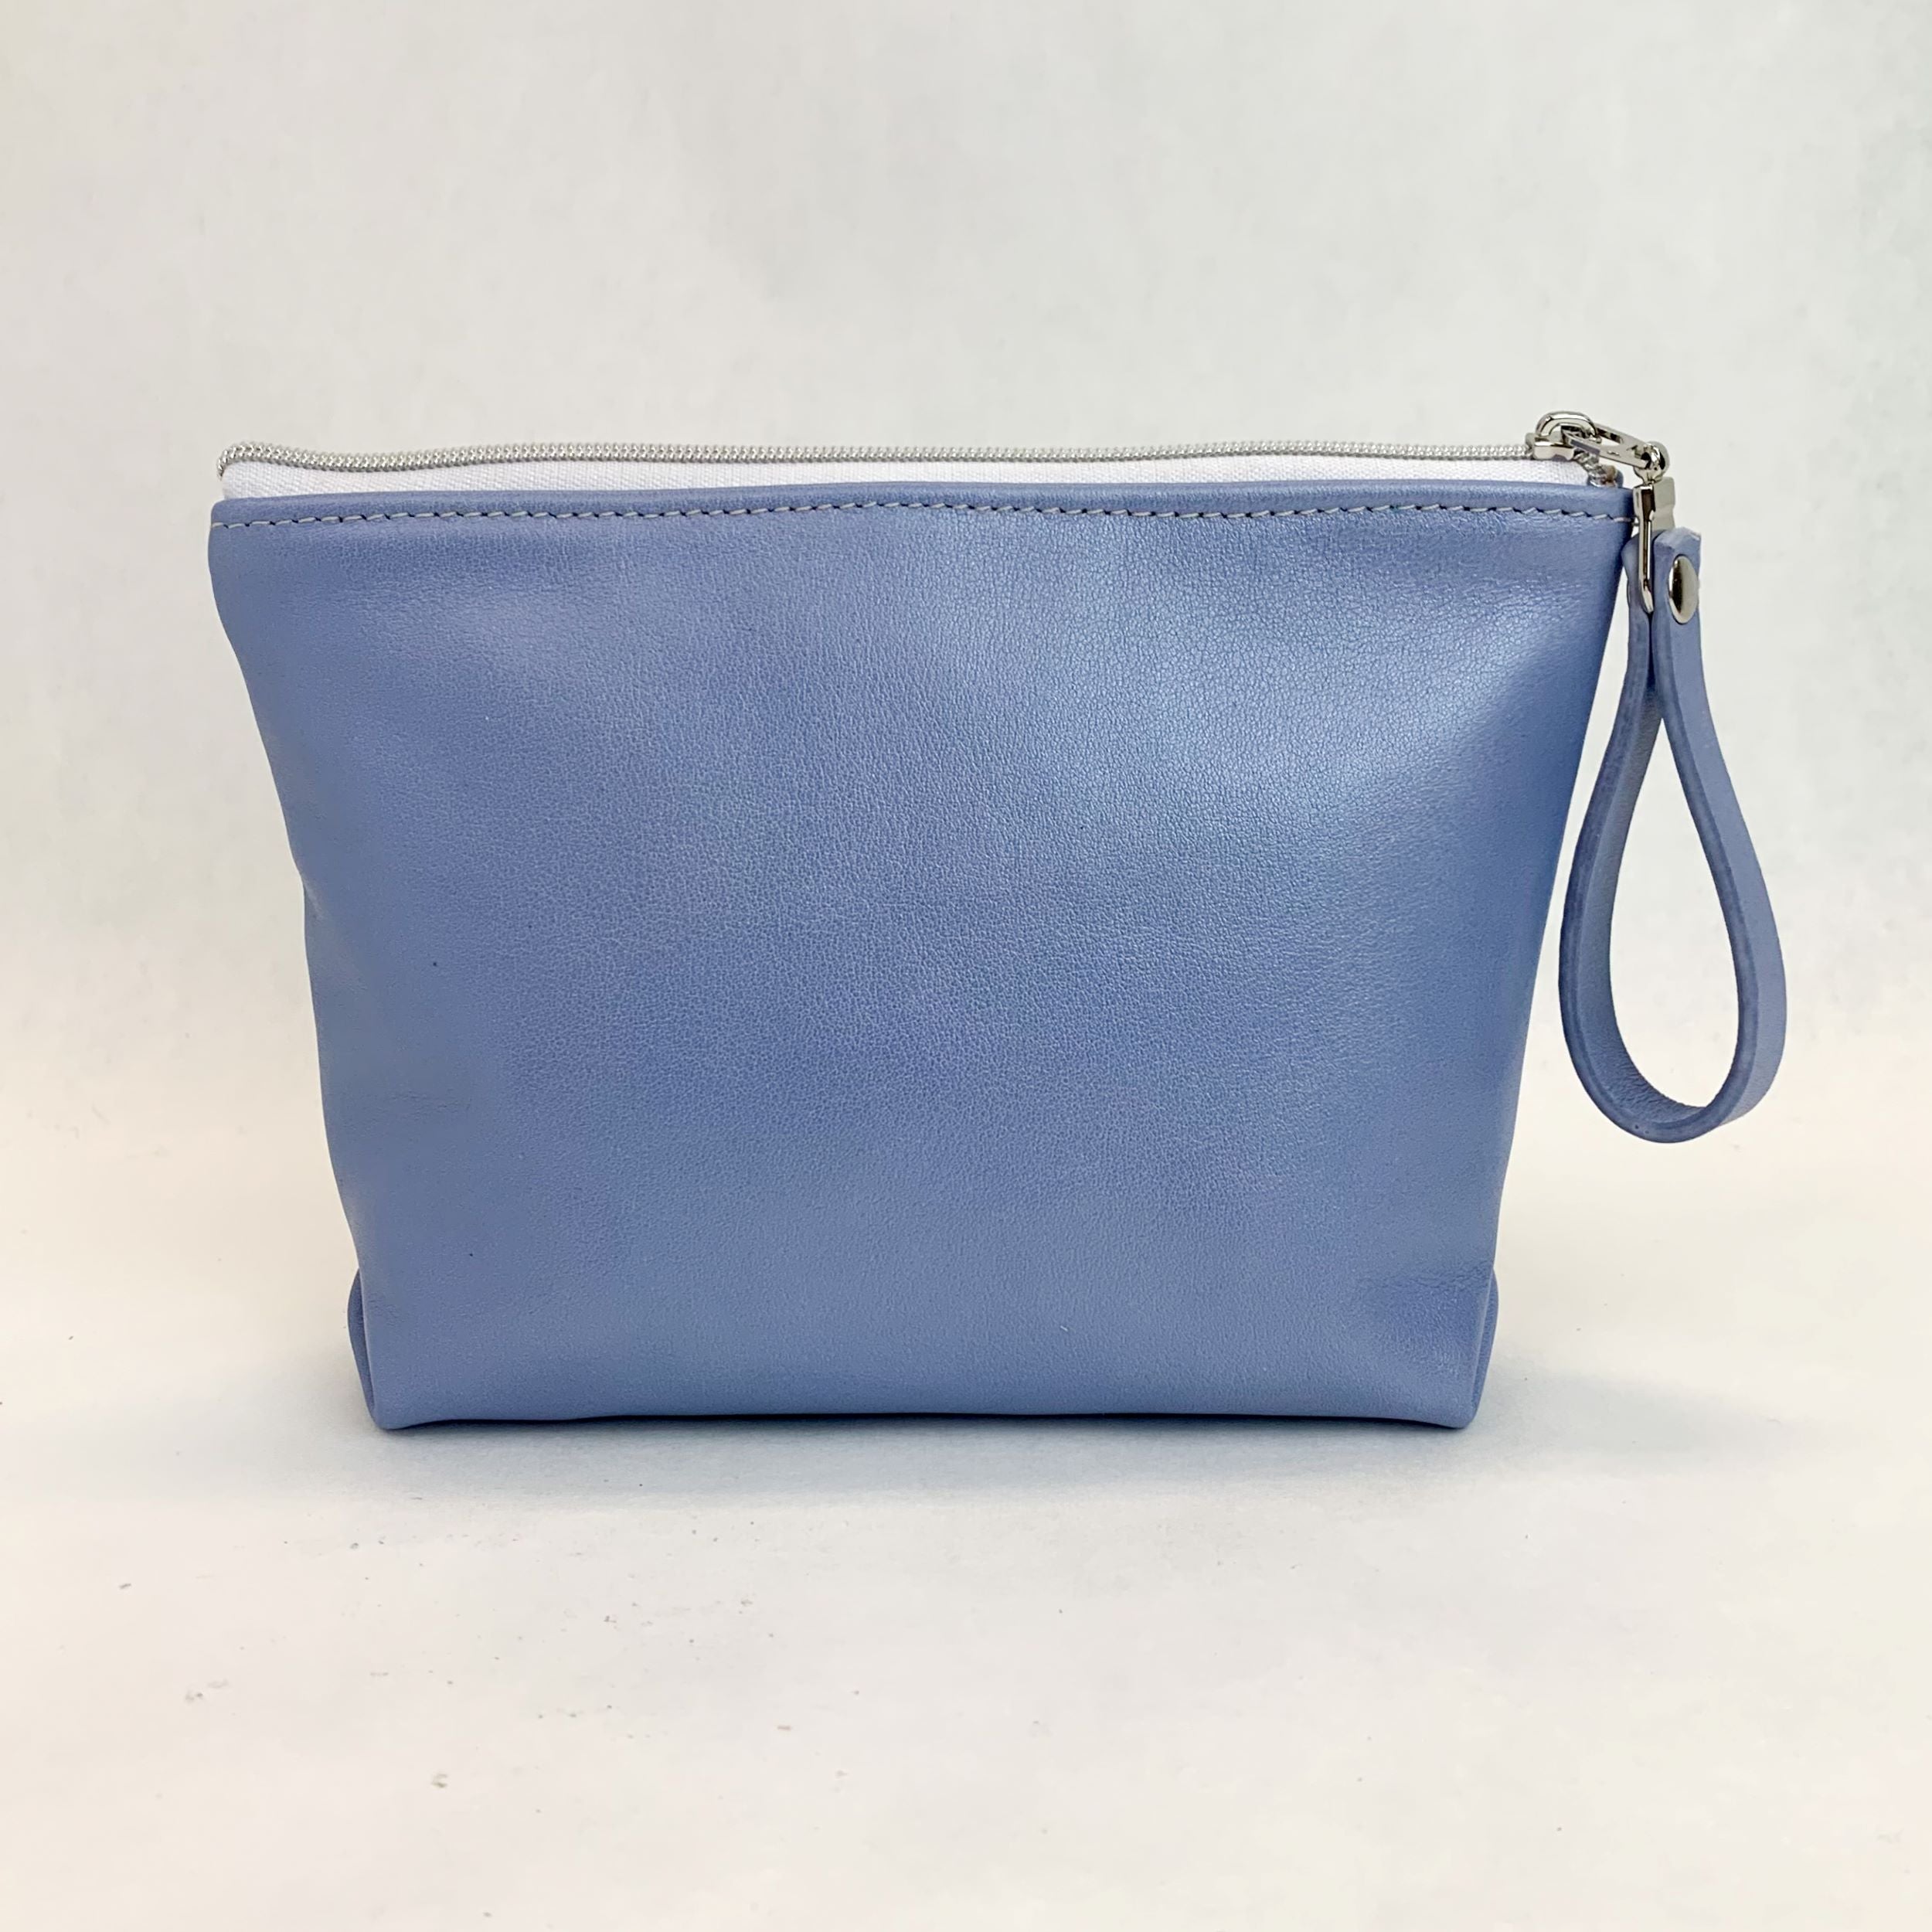 Back view T5 Cosmetics case toiletry bag designer handcrafted in smooth calf leather in light periwinkle blue.